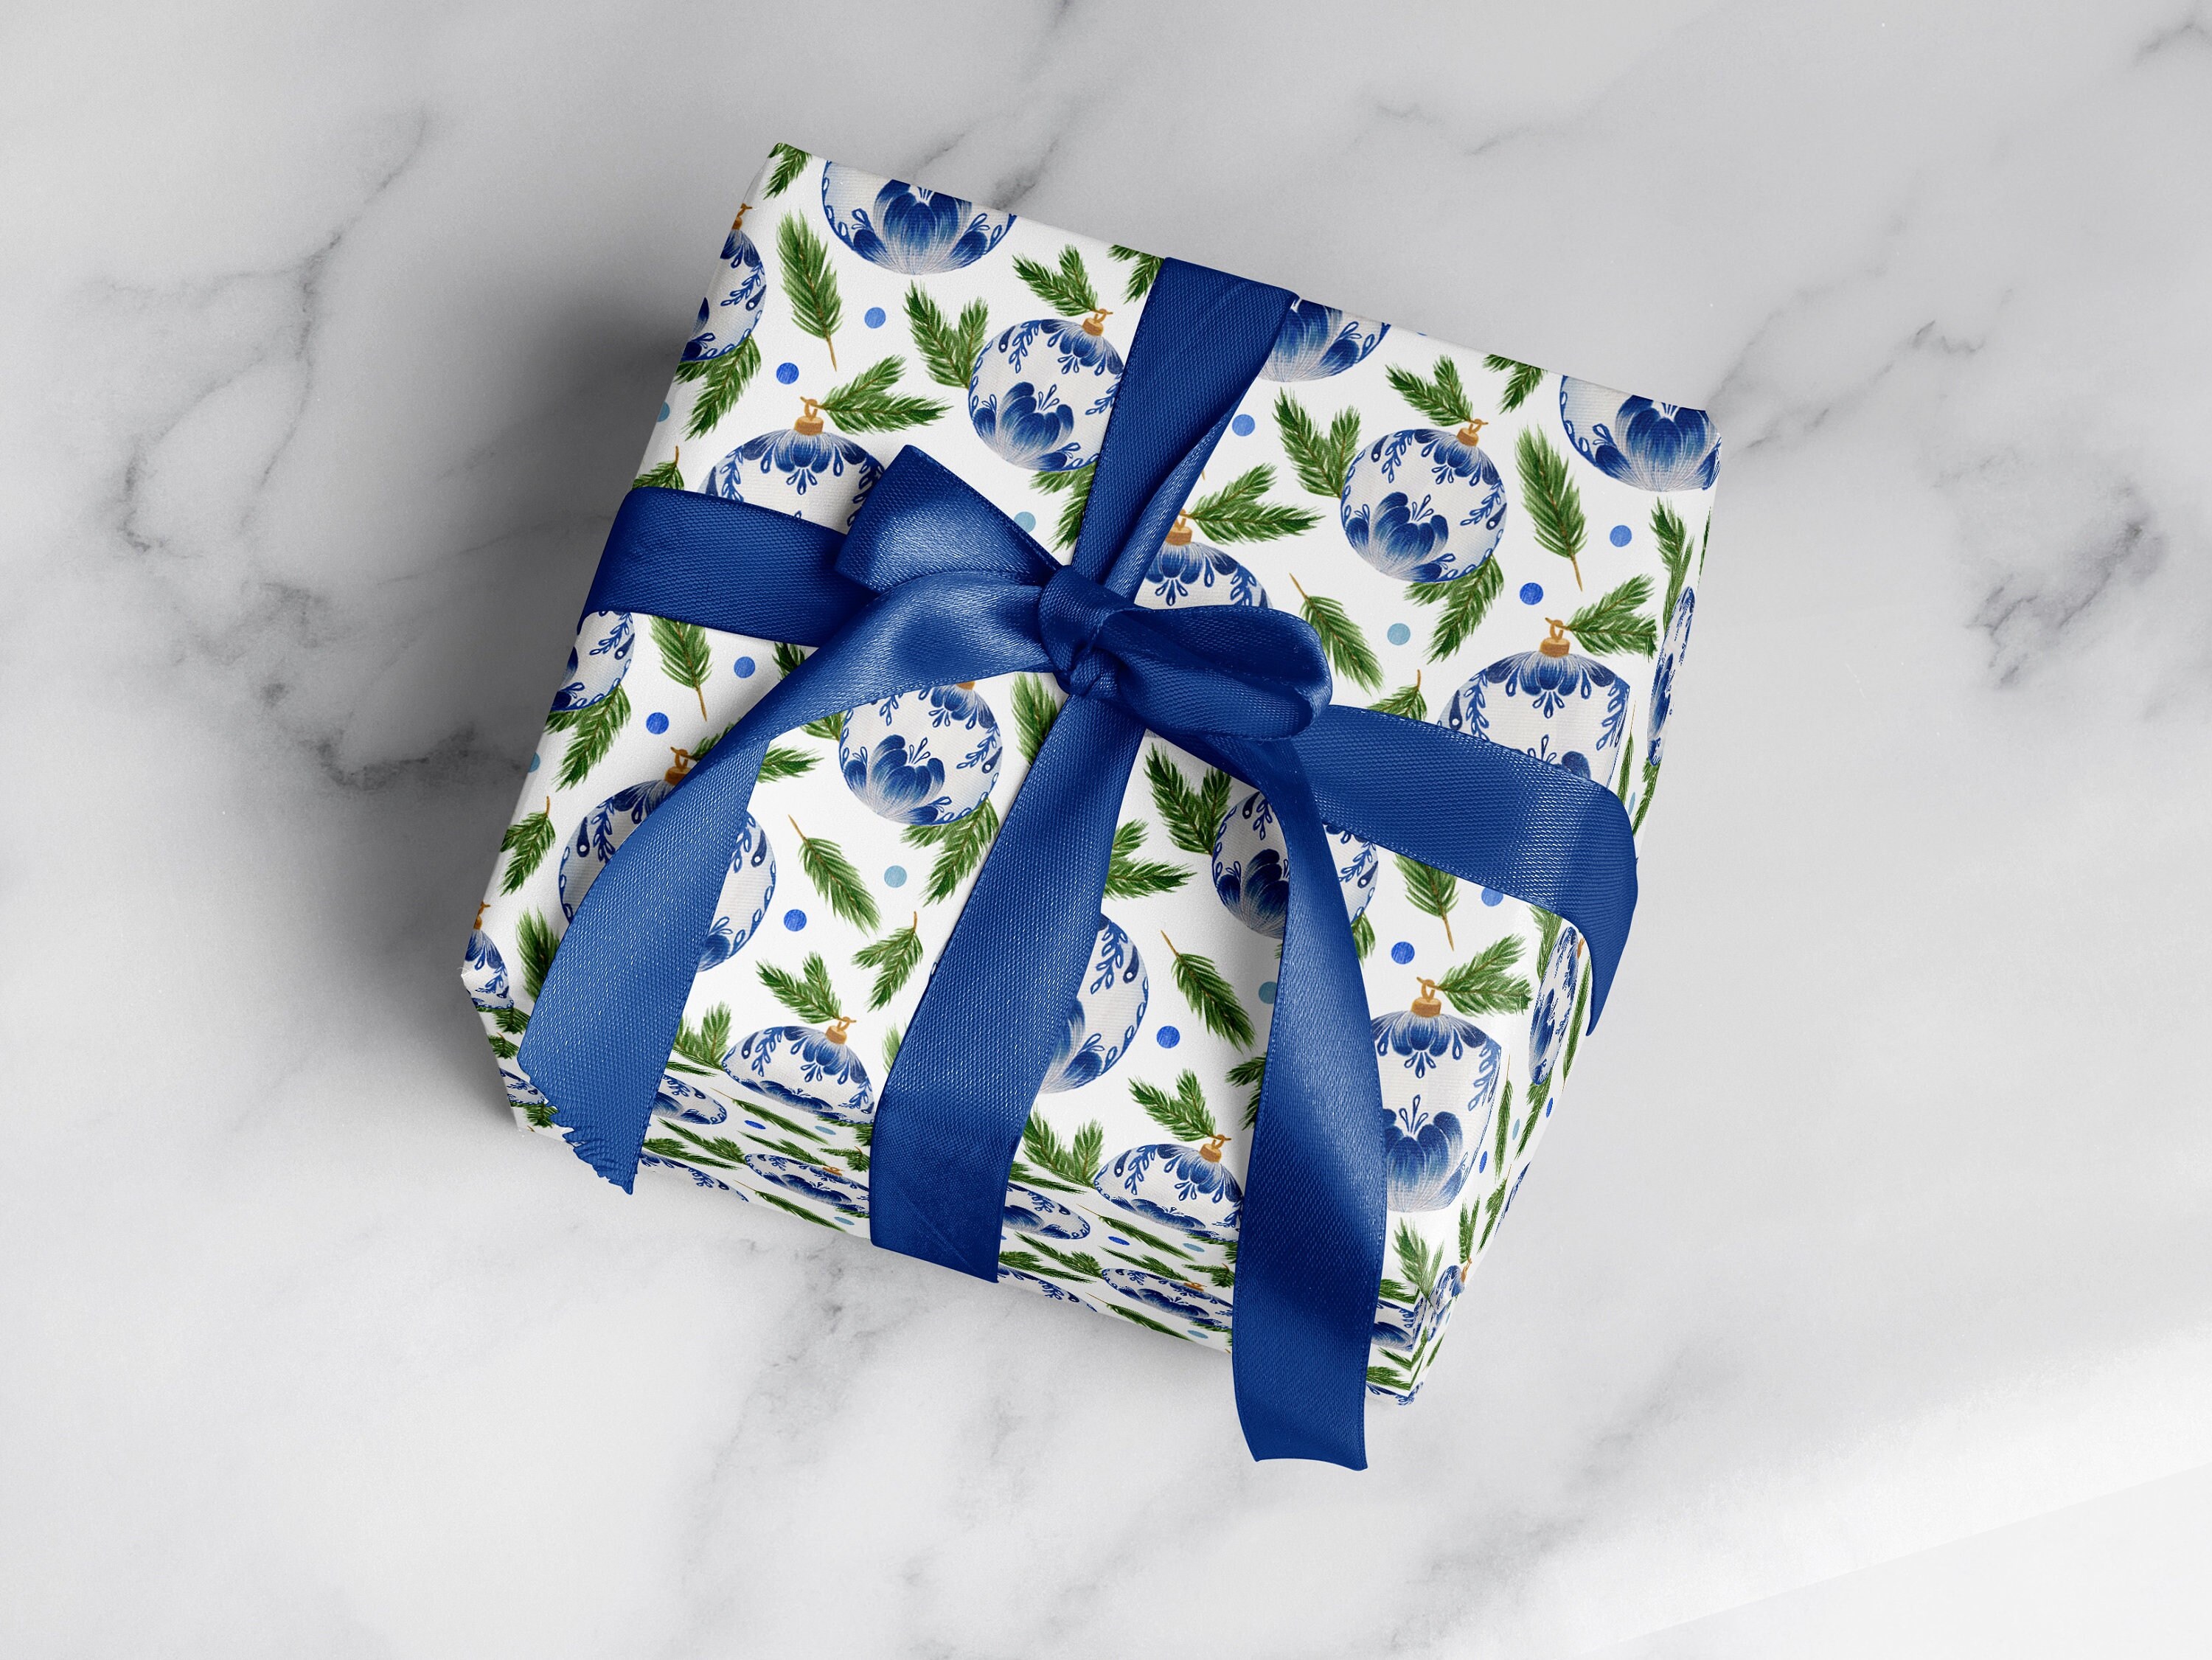 Beautiful Christmas Wrapping Paper Blue and White Christmas Gift